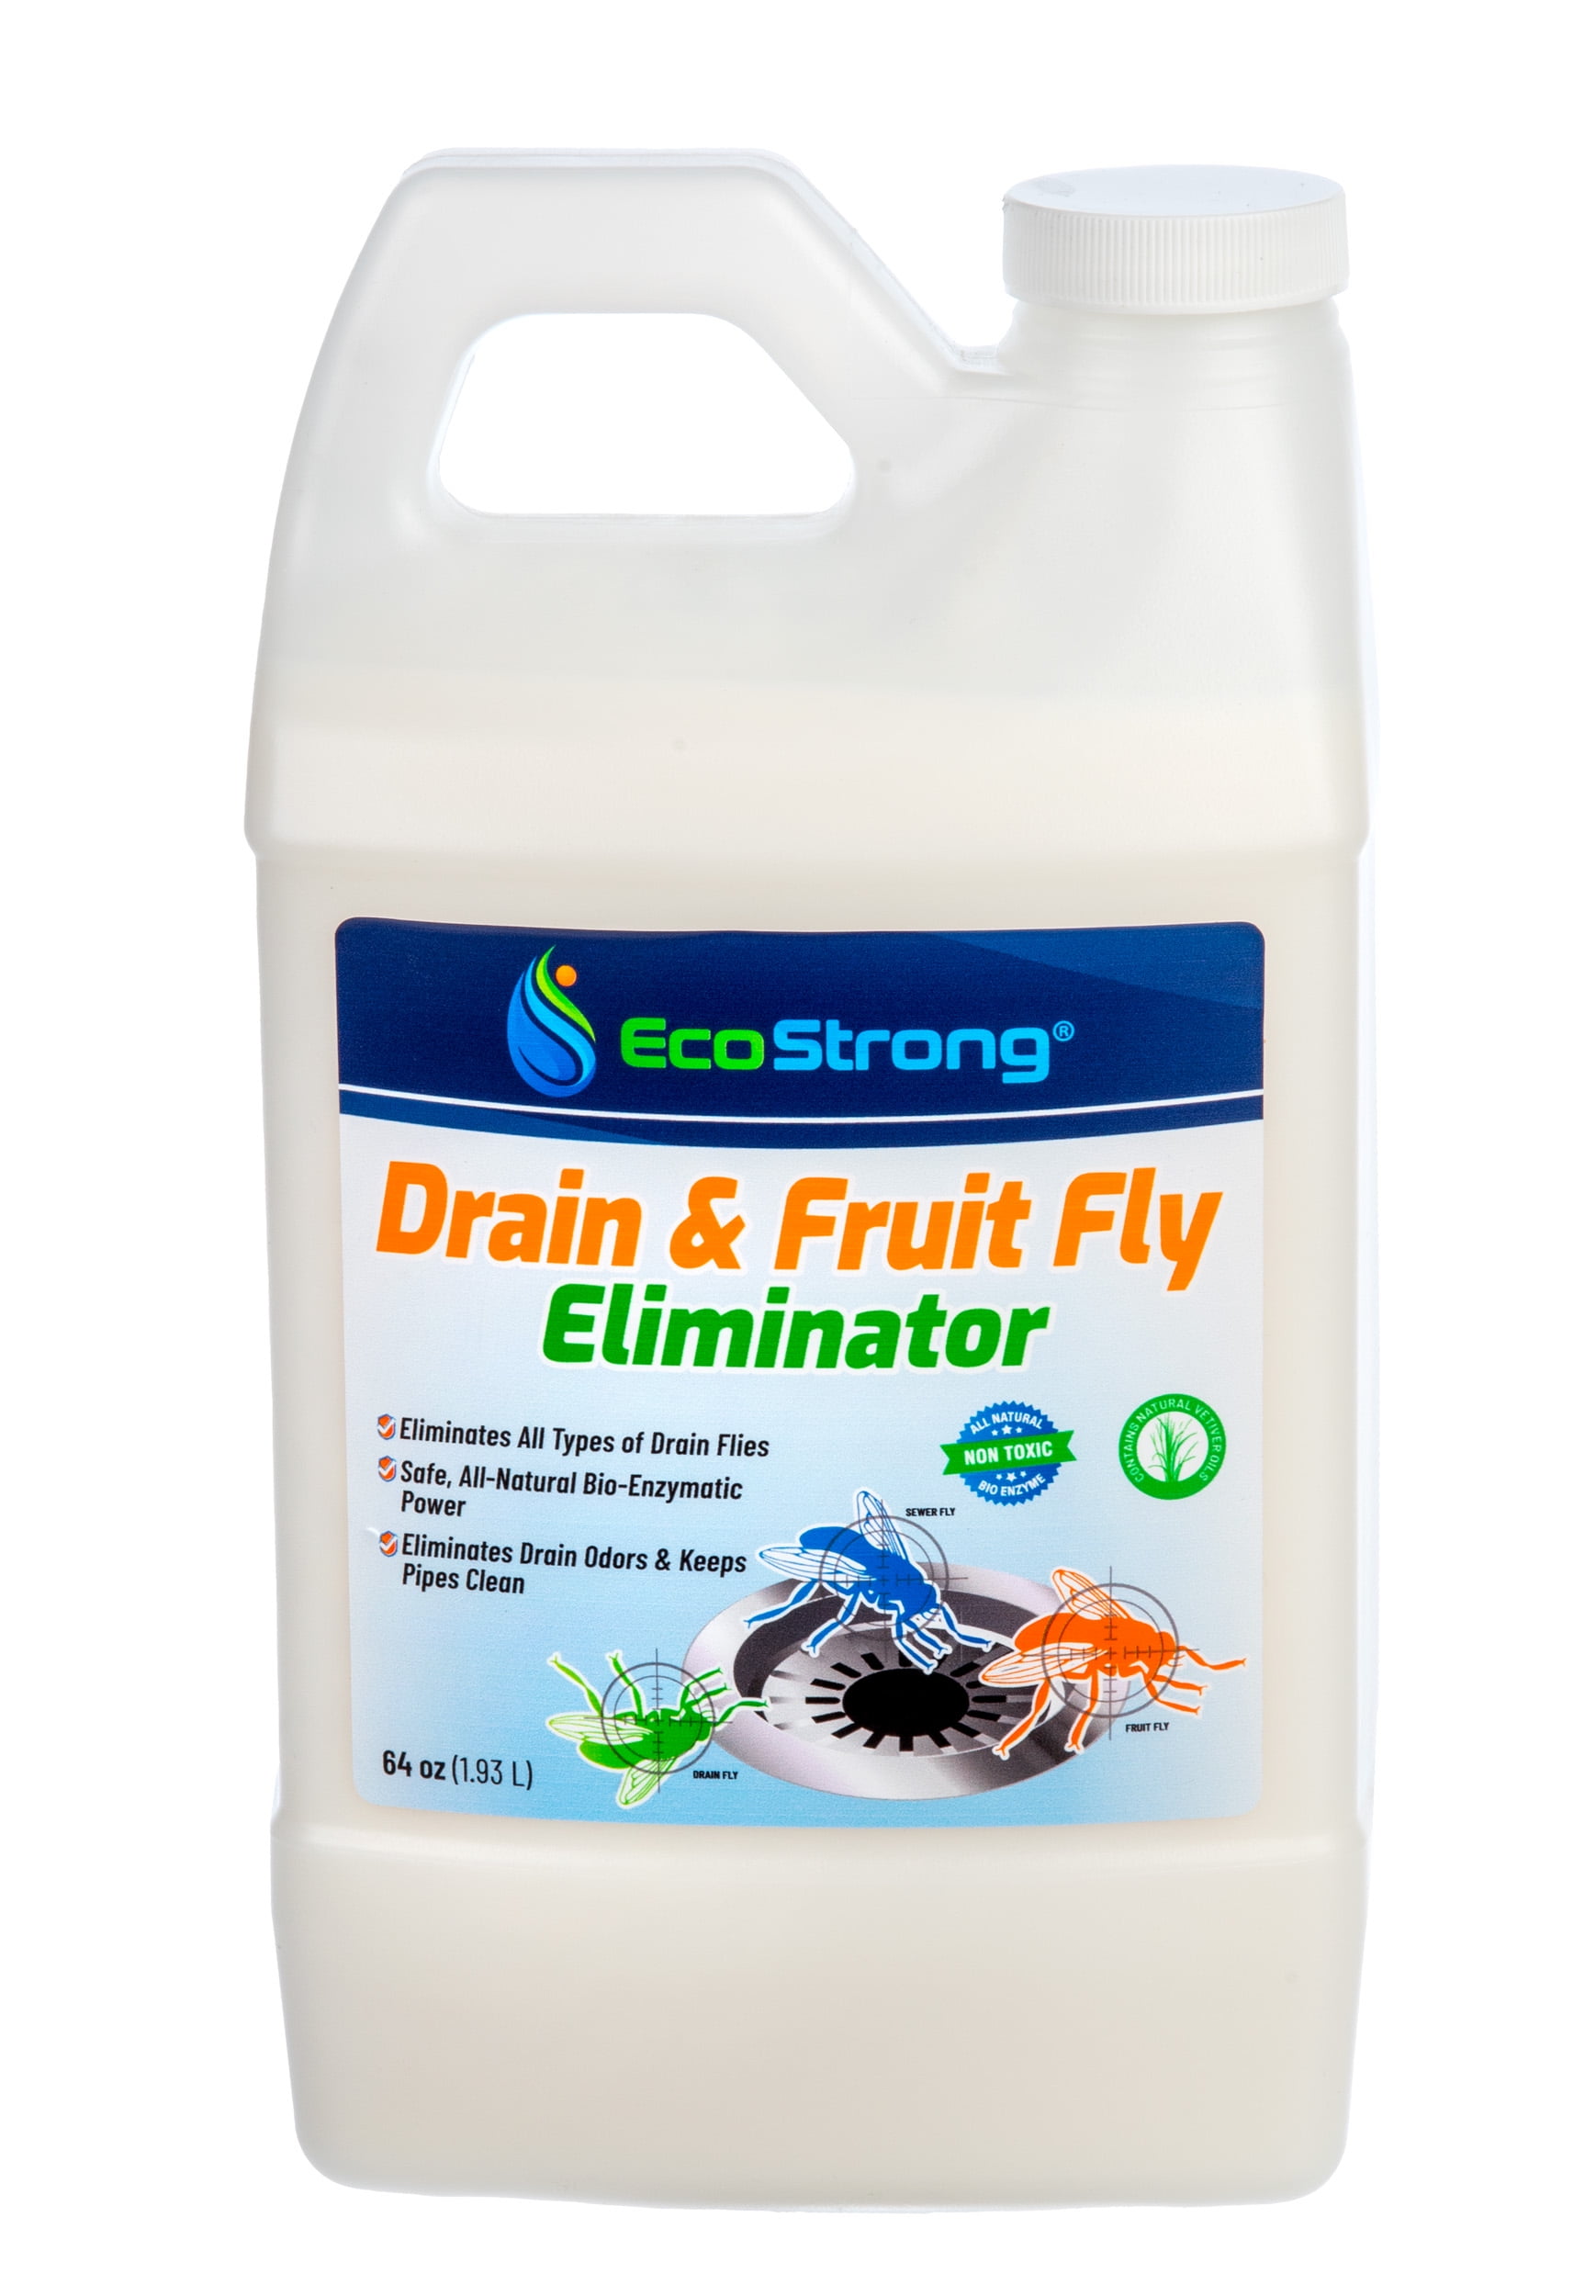 Are those Fruit Flies, Gnats or Drain Flies?